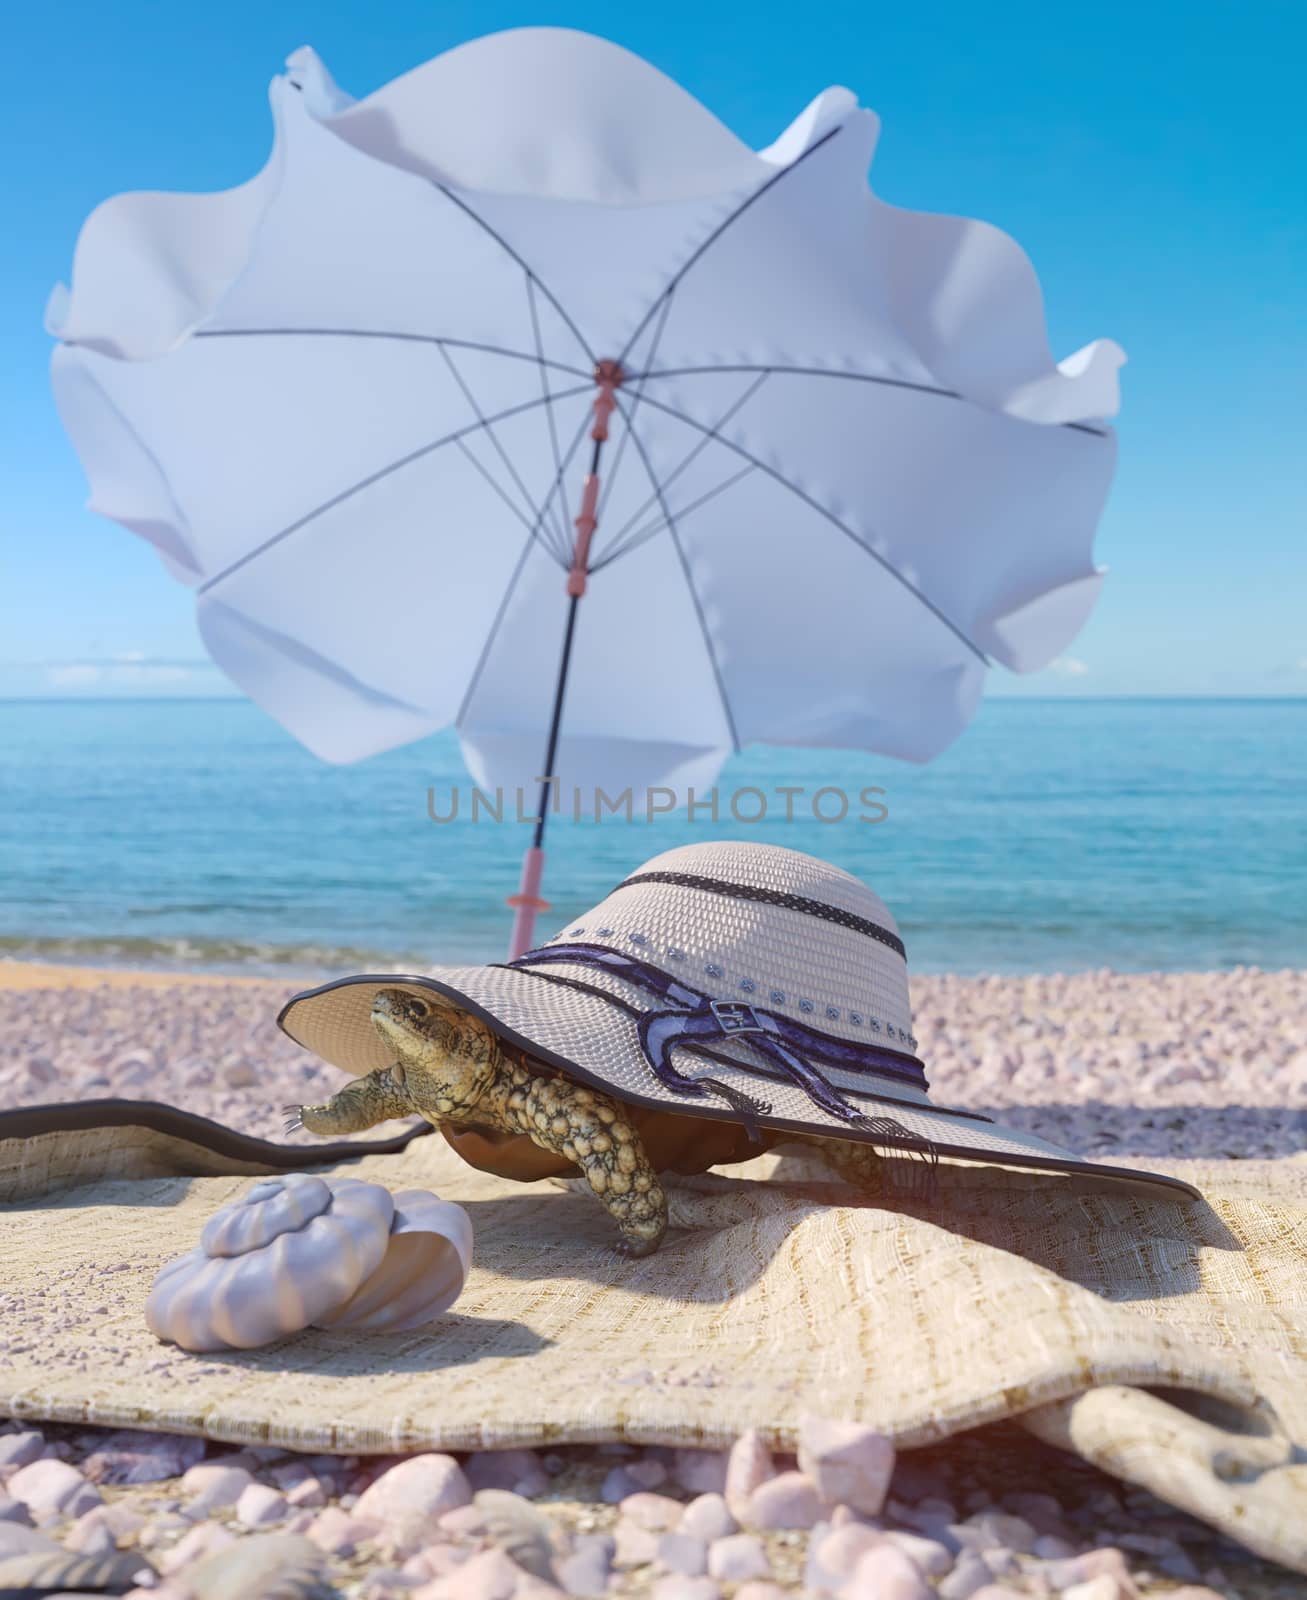 relaxing vacation concept background with seashell,umbrella, turtle and beach accessories by denisgo